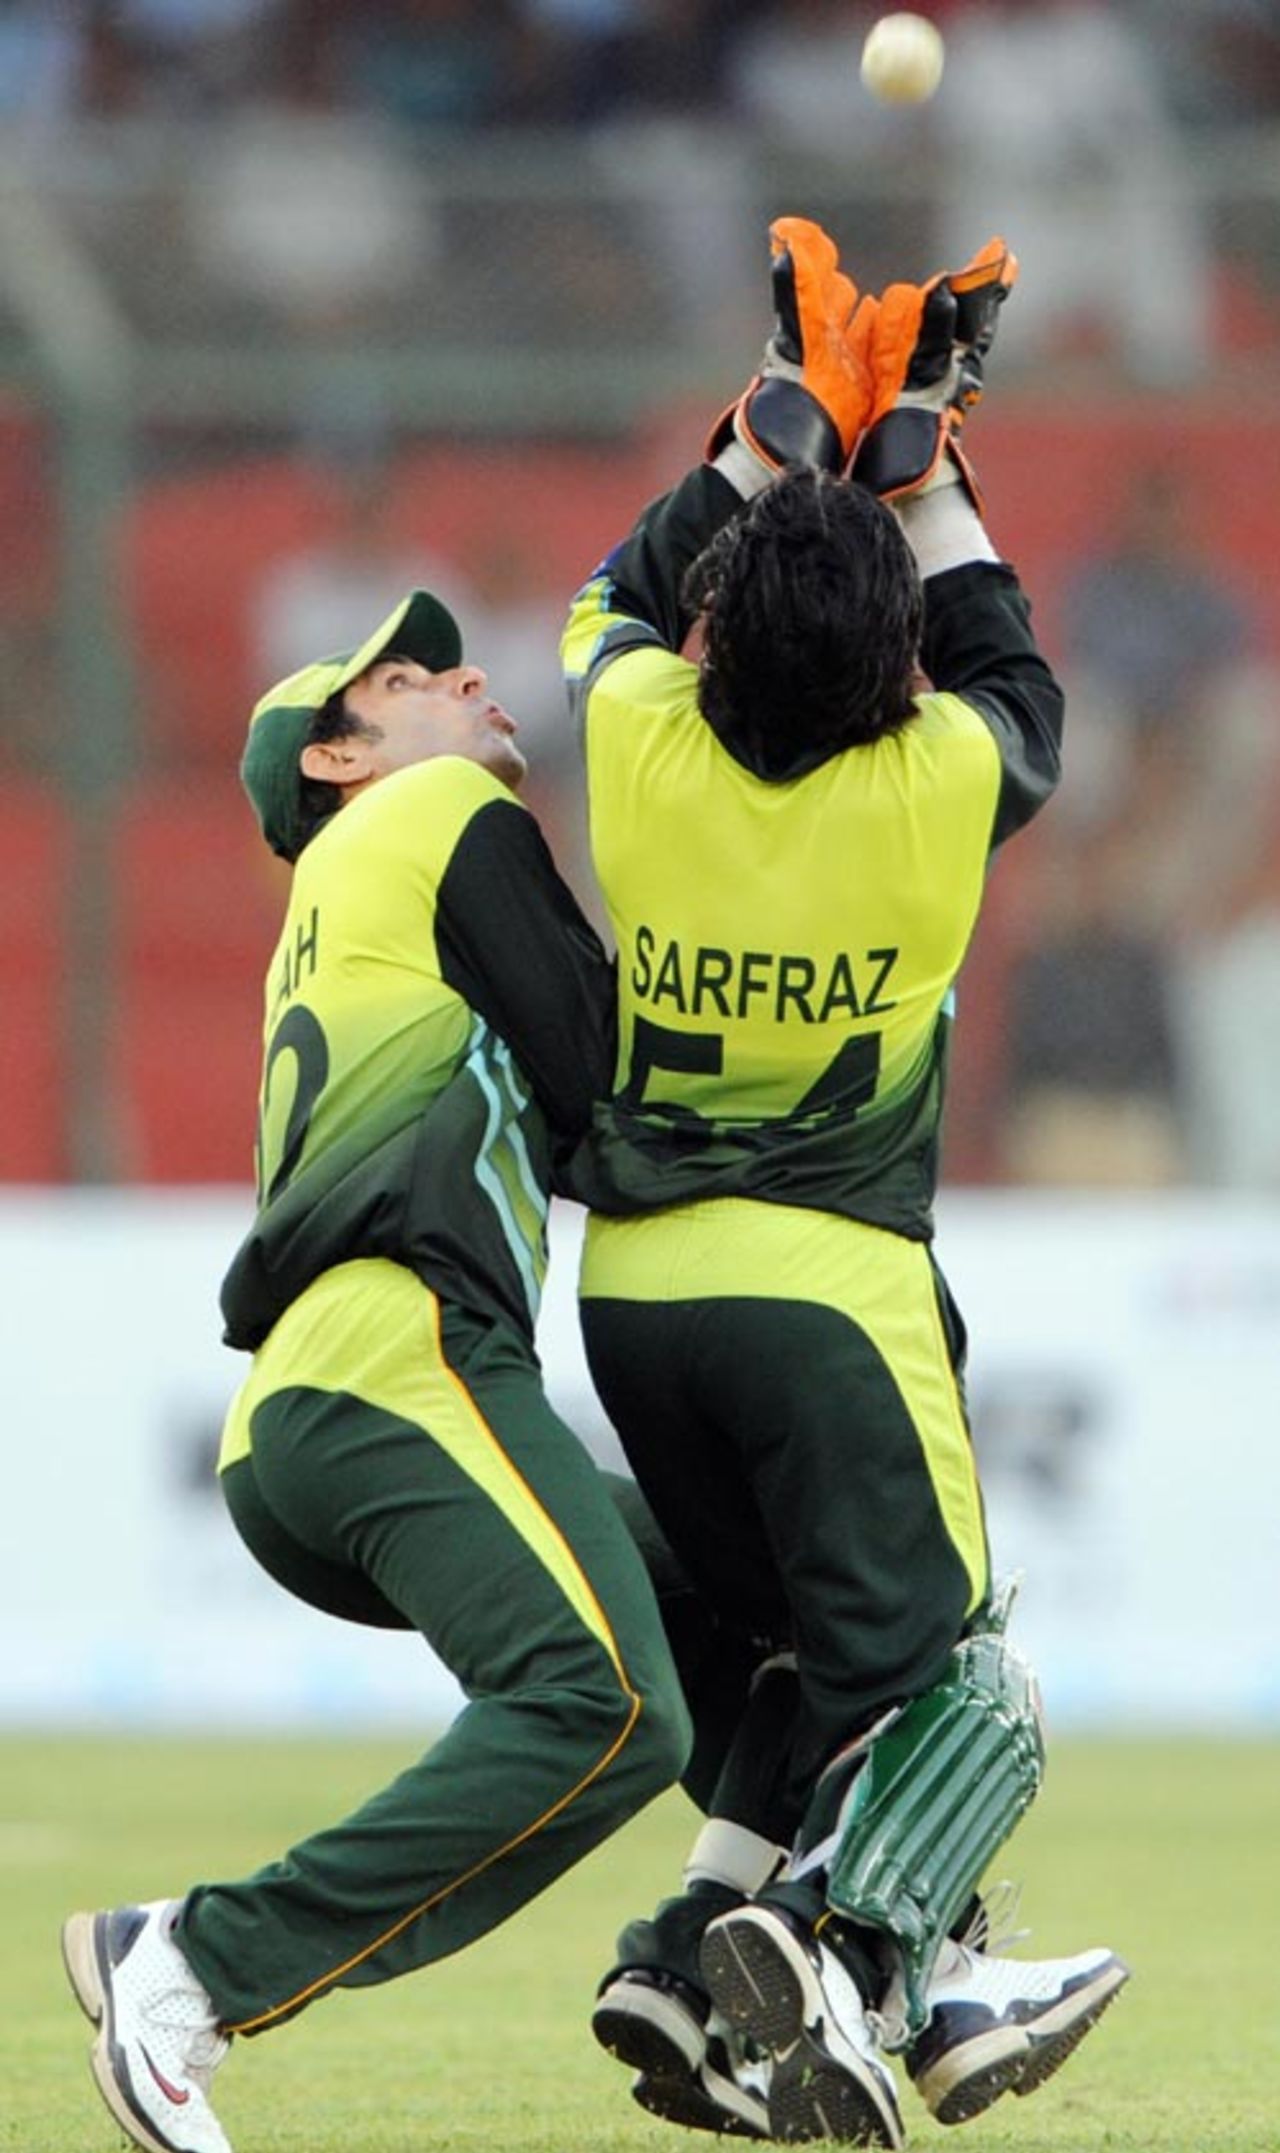 Misbah-u-Haq and Sarfraz Ahmed collide as they go for a catch, Pakistan v India, Super Four, Asia Cup, Karachi, July 2, 2008